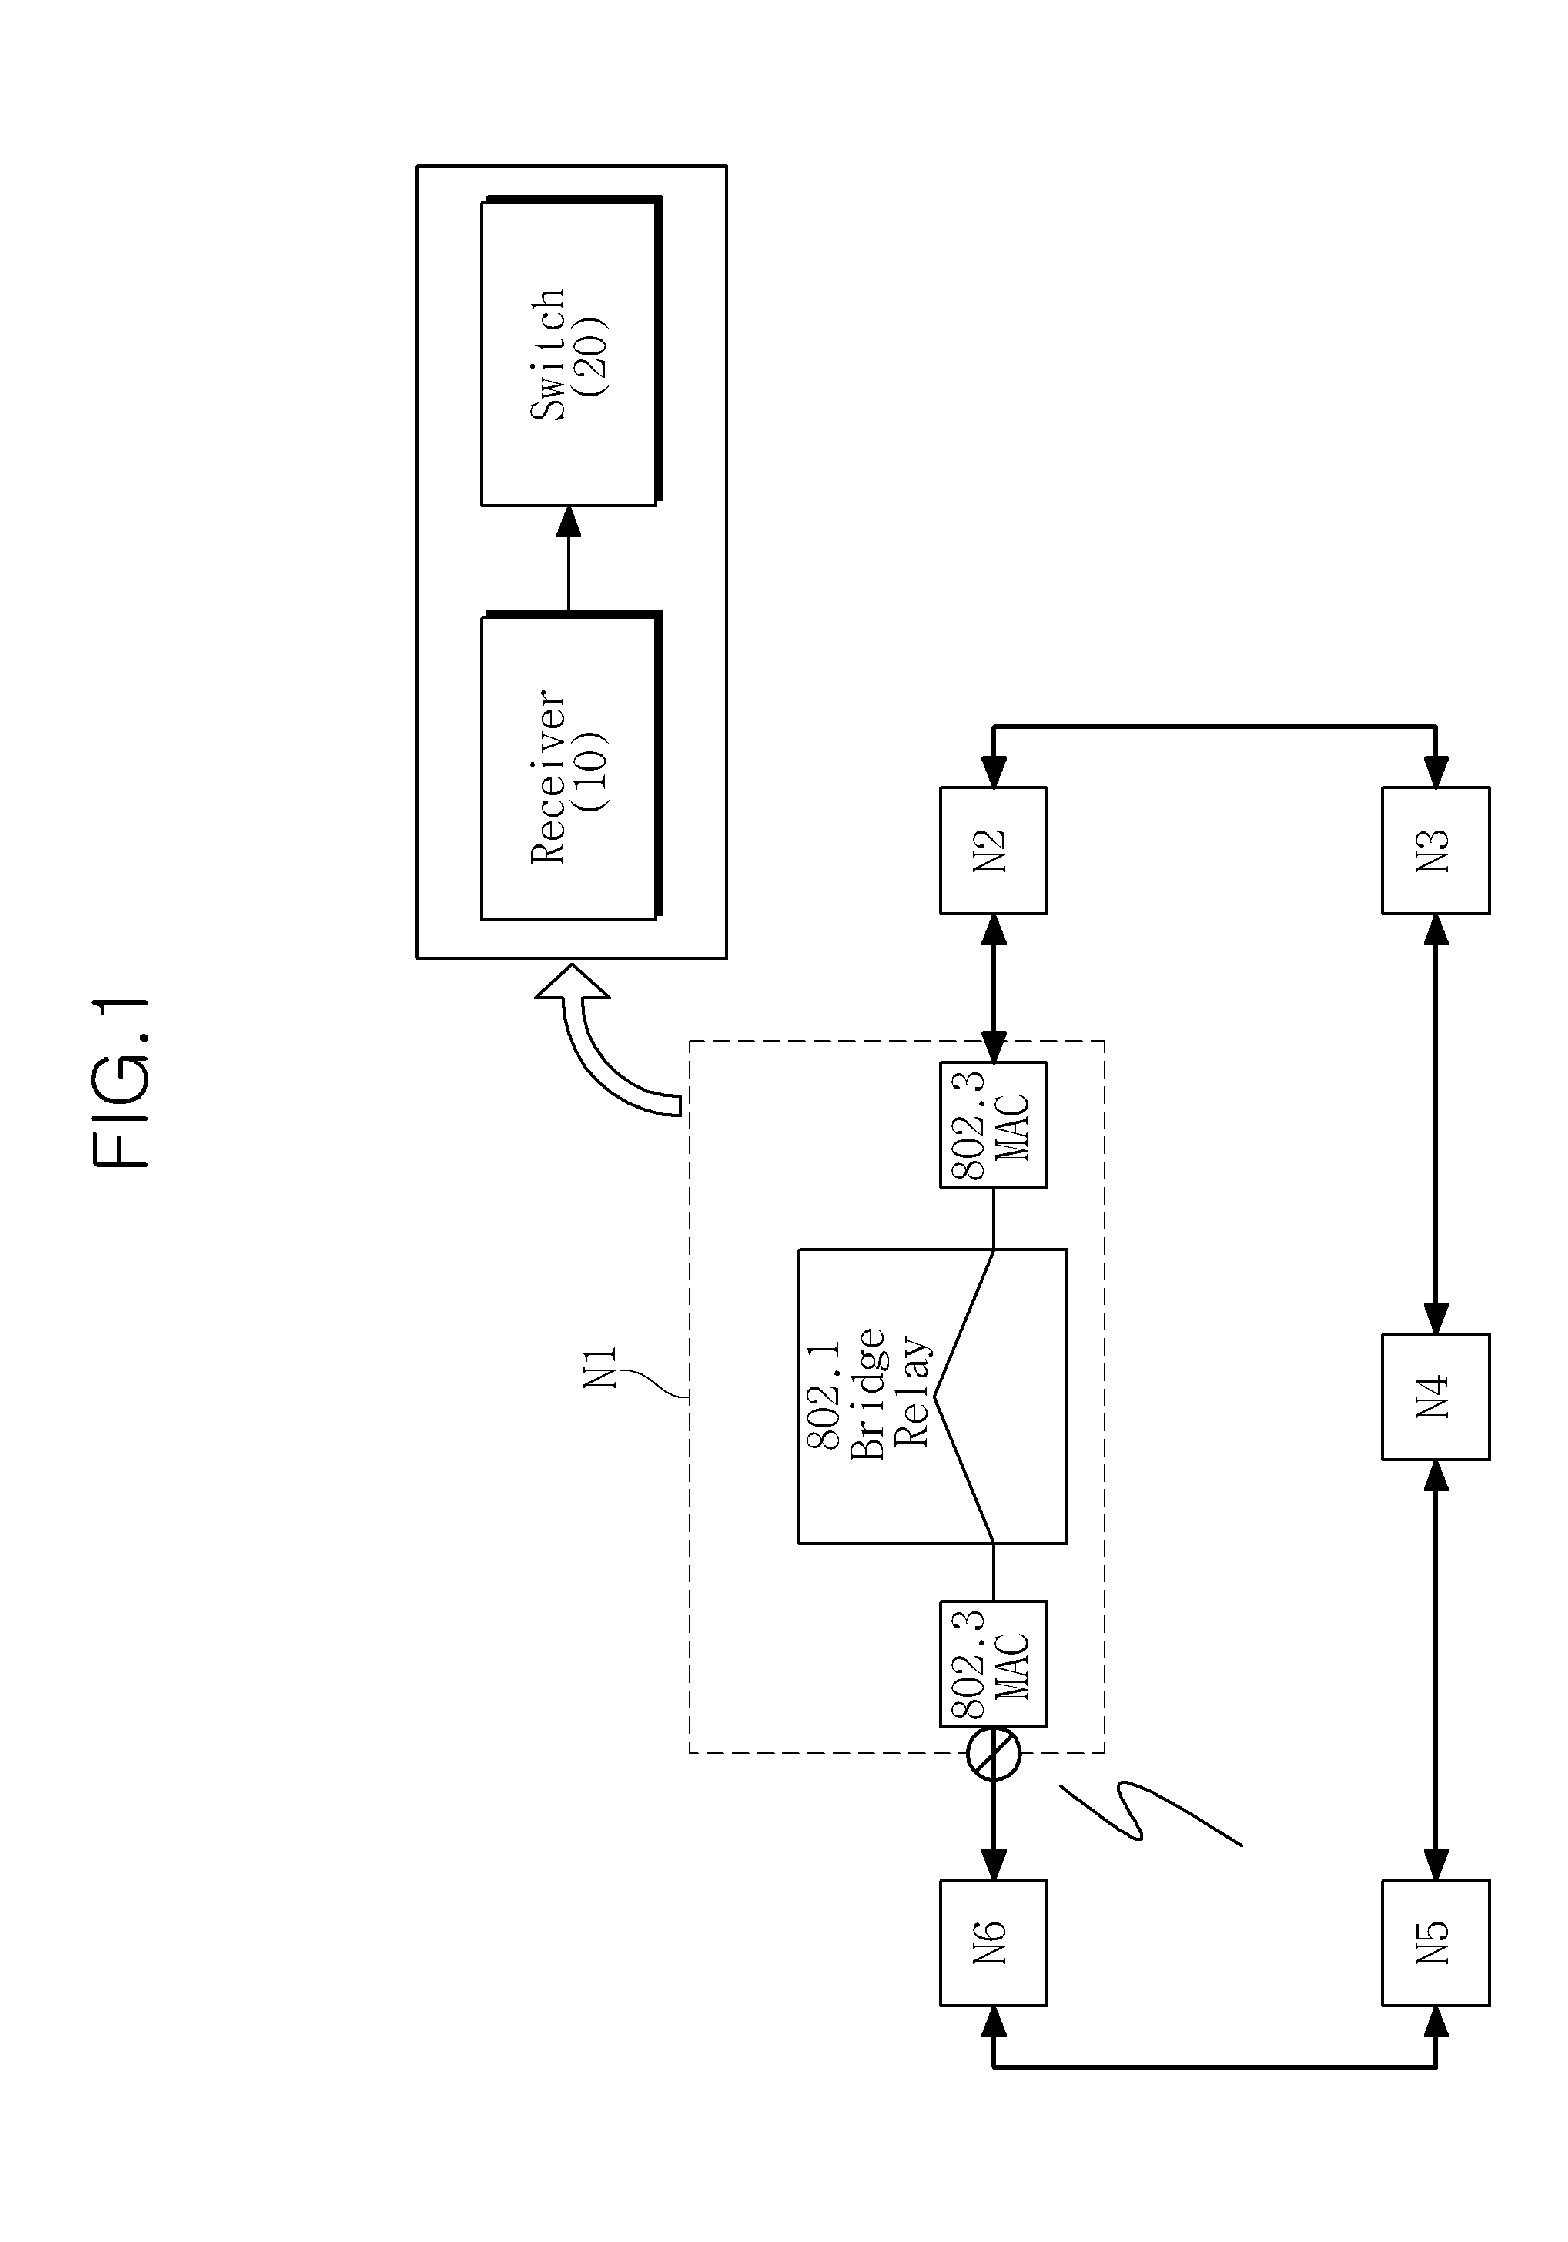 Protection switching method and apparatus for use in ring network